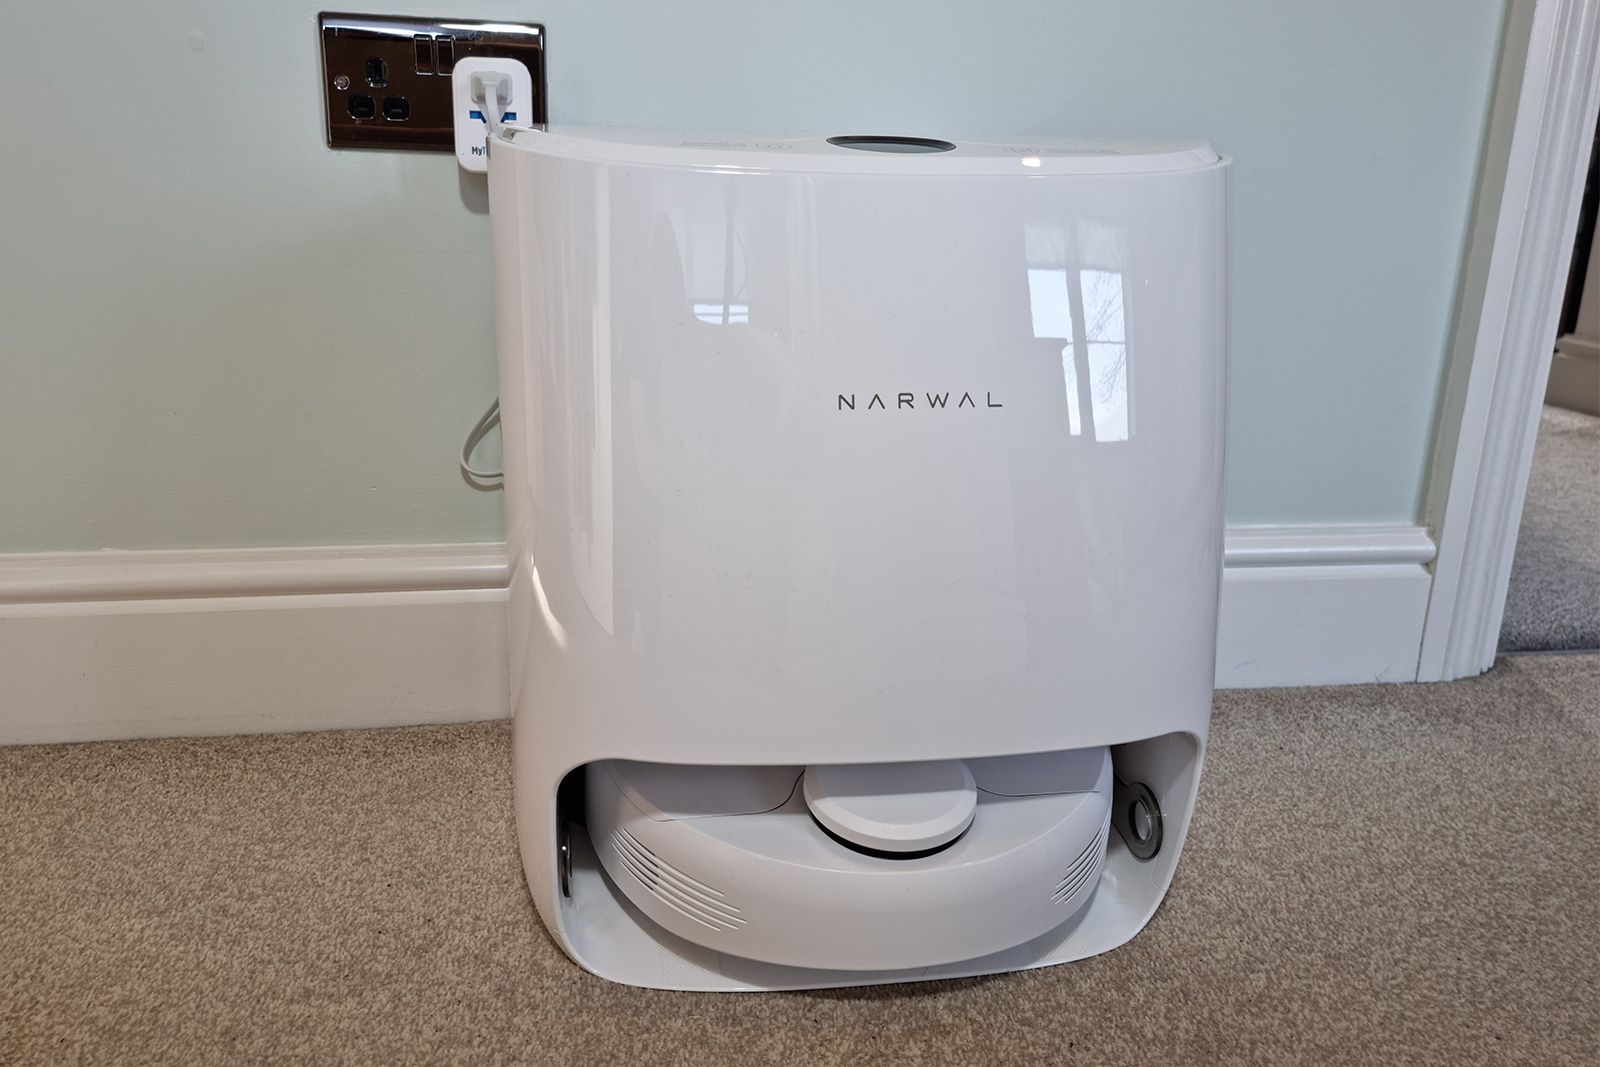 Narwal's superb T10 robot vacuum will keep your home sparkling clean photo 7